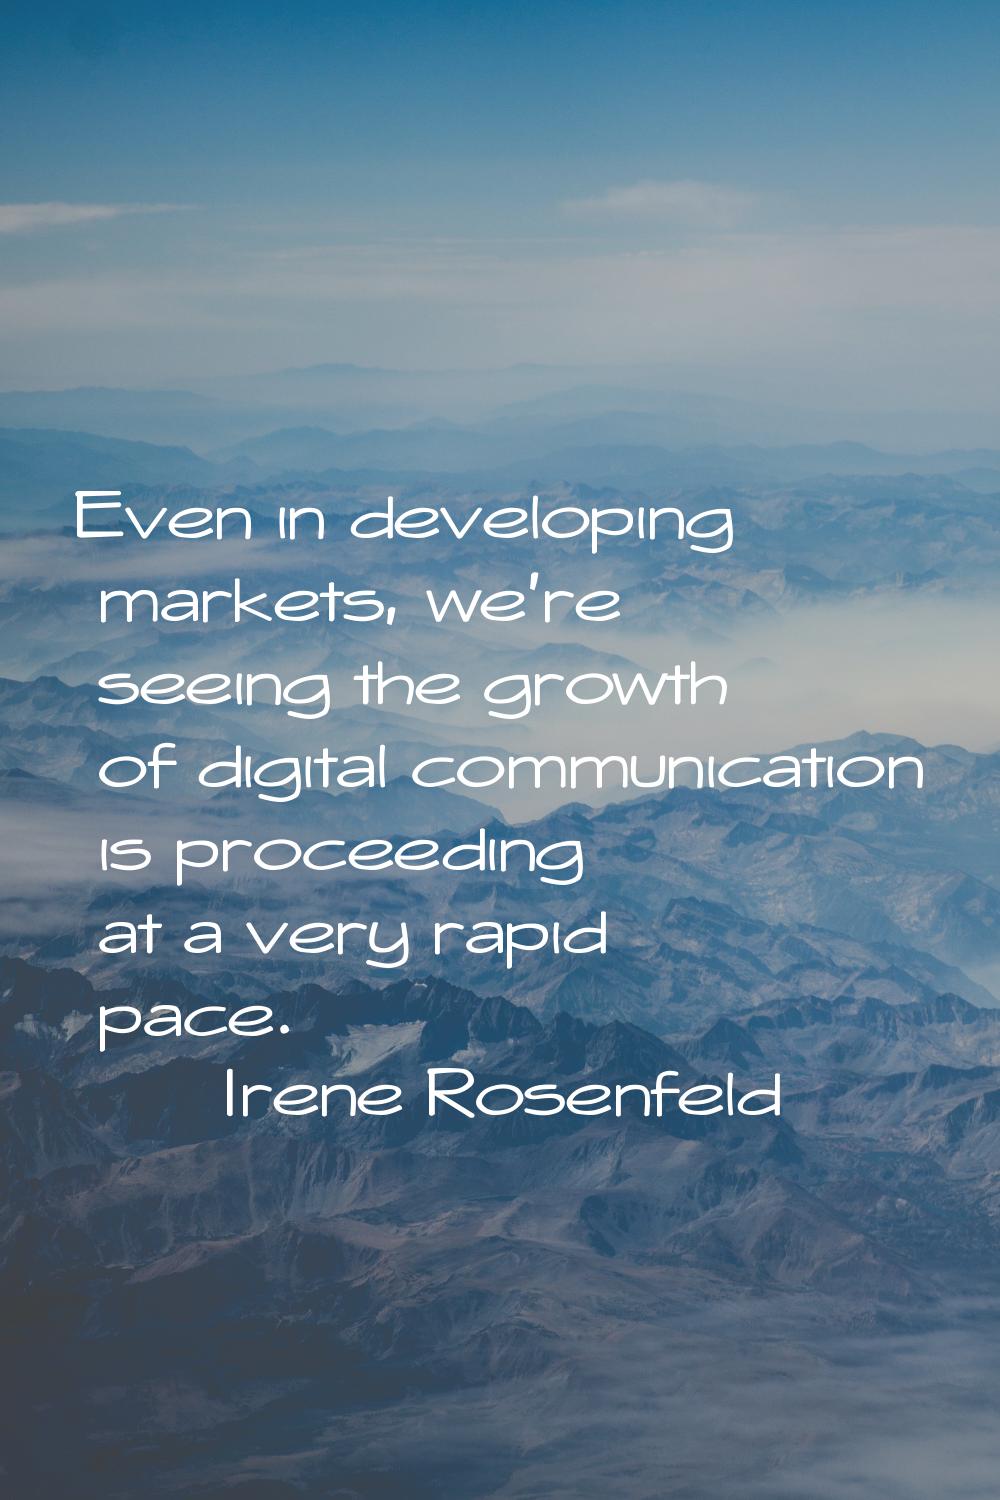 Even in developing markets, we're seeing the growth of digital communication is proceeding at a ver